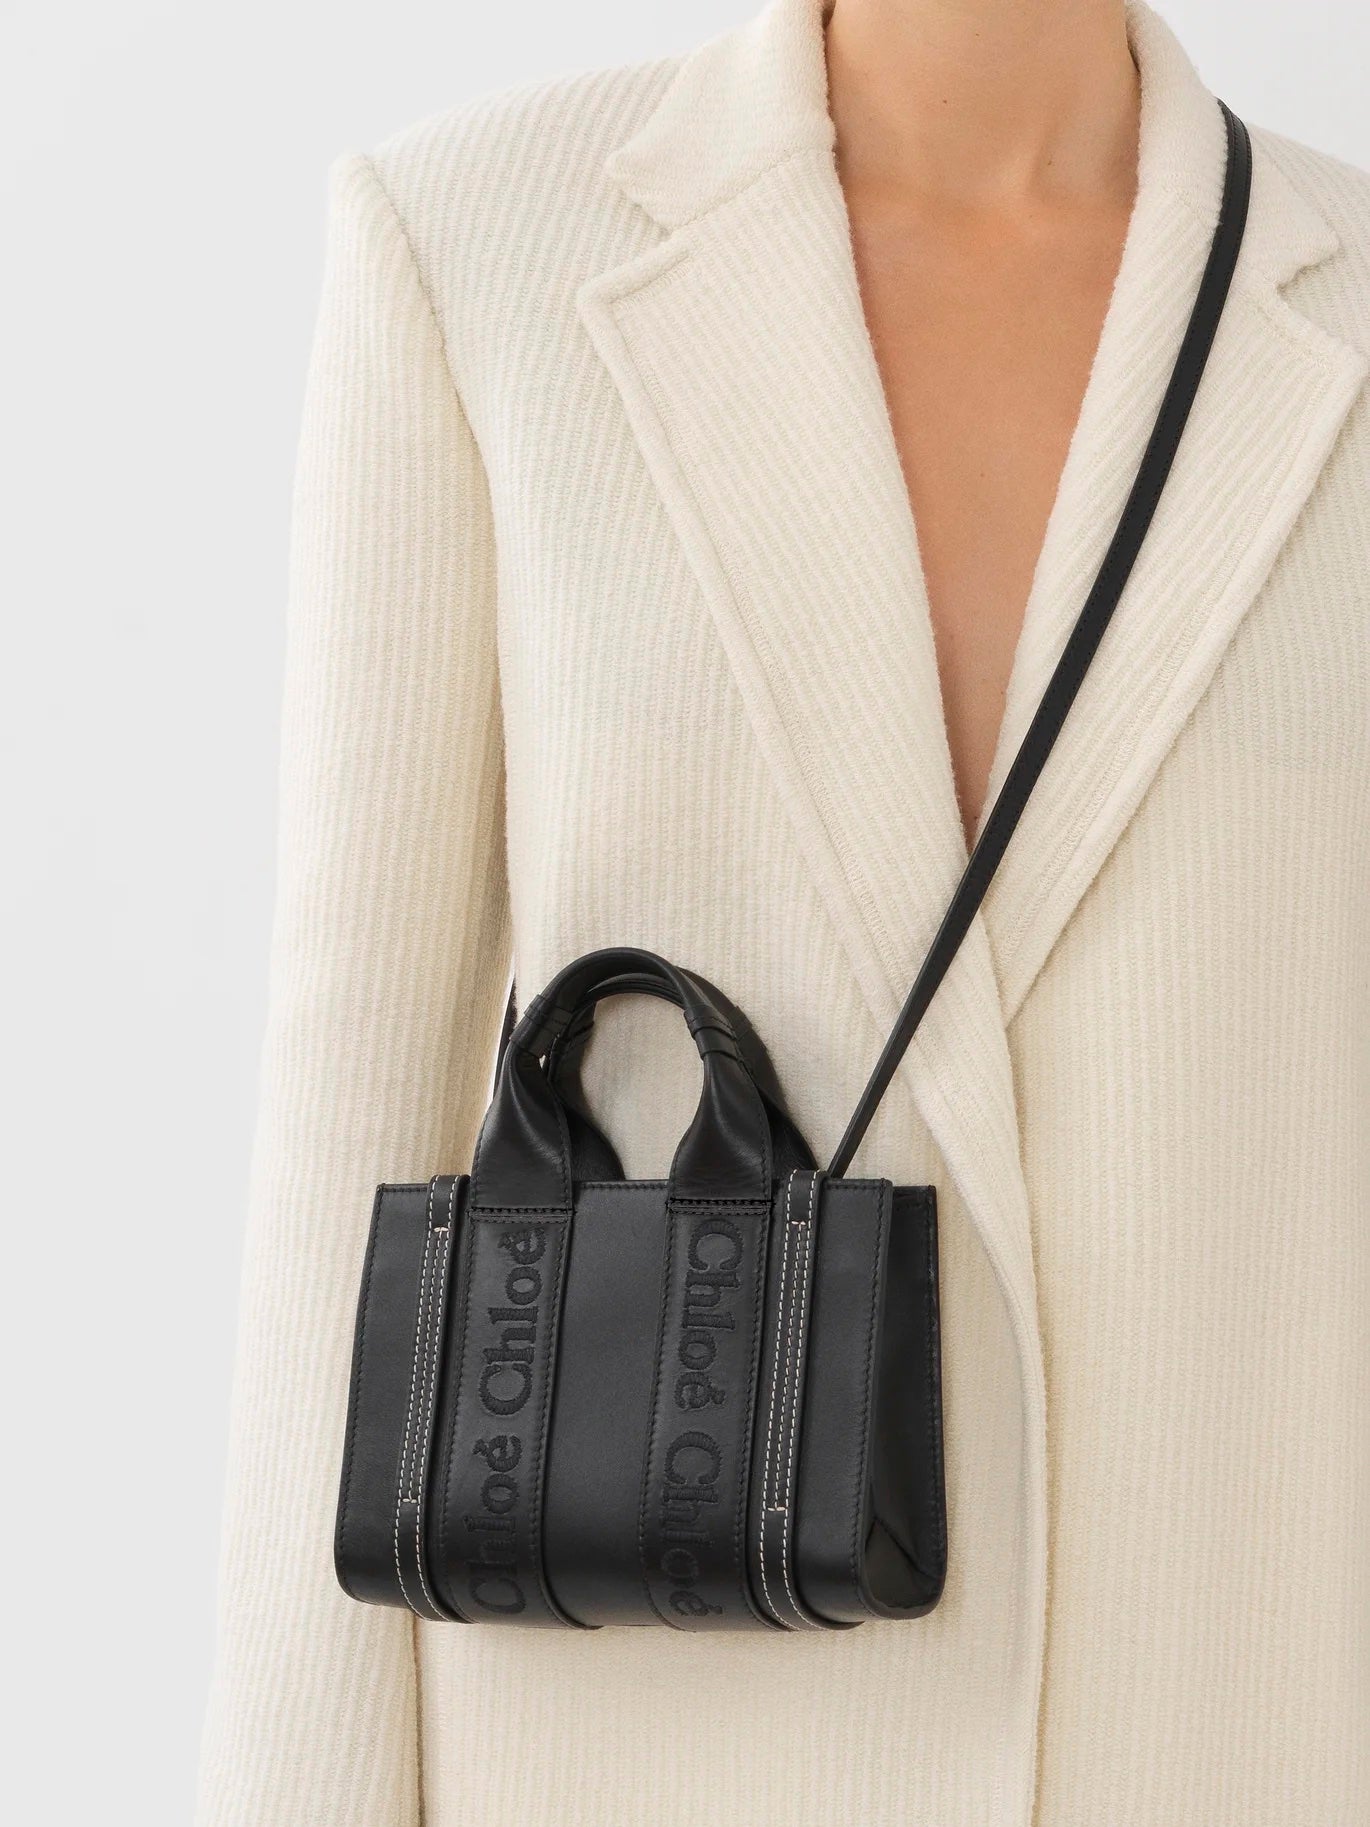 A model wearing a cream wool jacket with a small black purse. The black purse has a long strap sitting over the models right shoulder. The black purse has two small handles on the top with brand detailing.